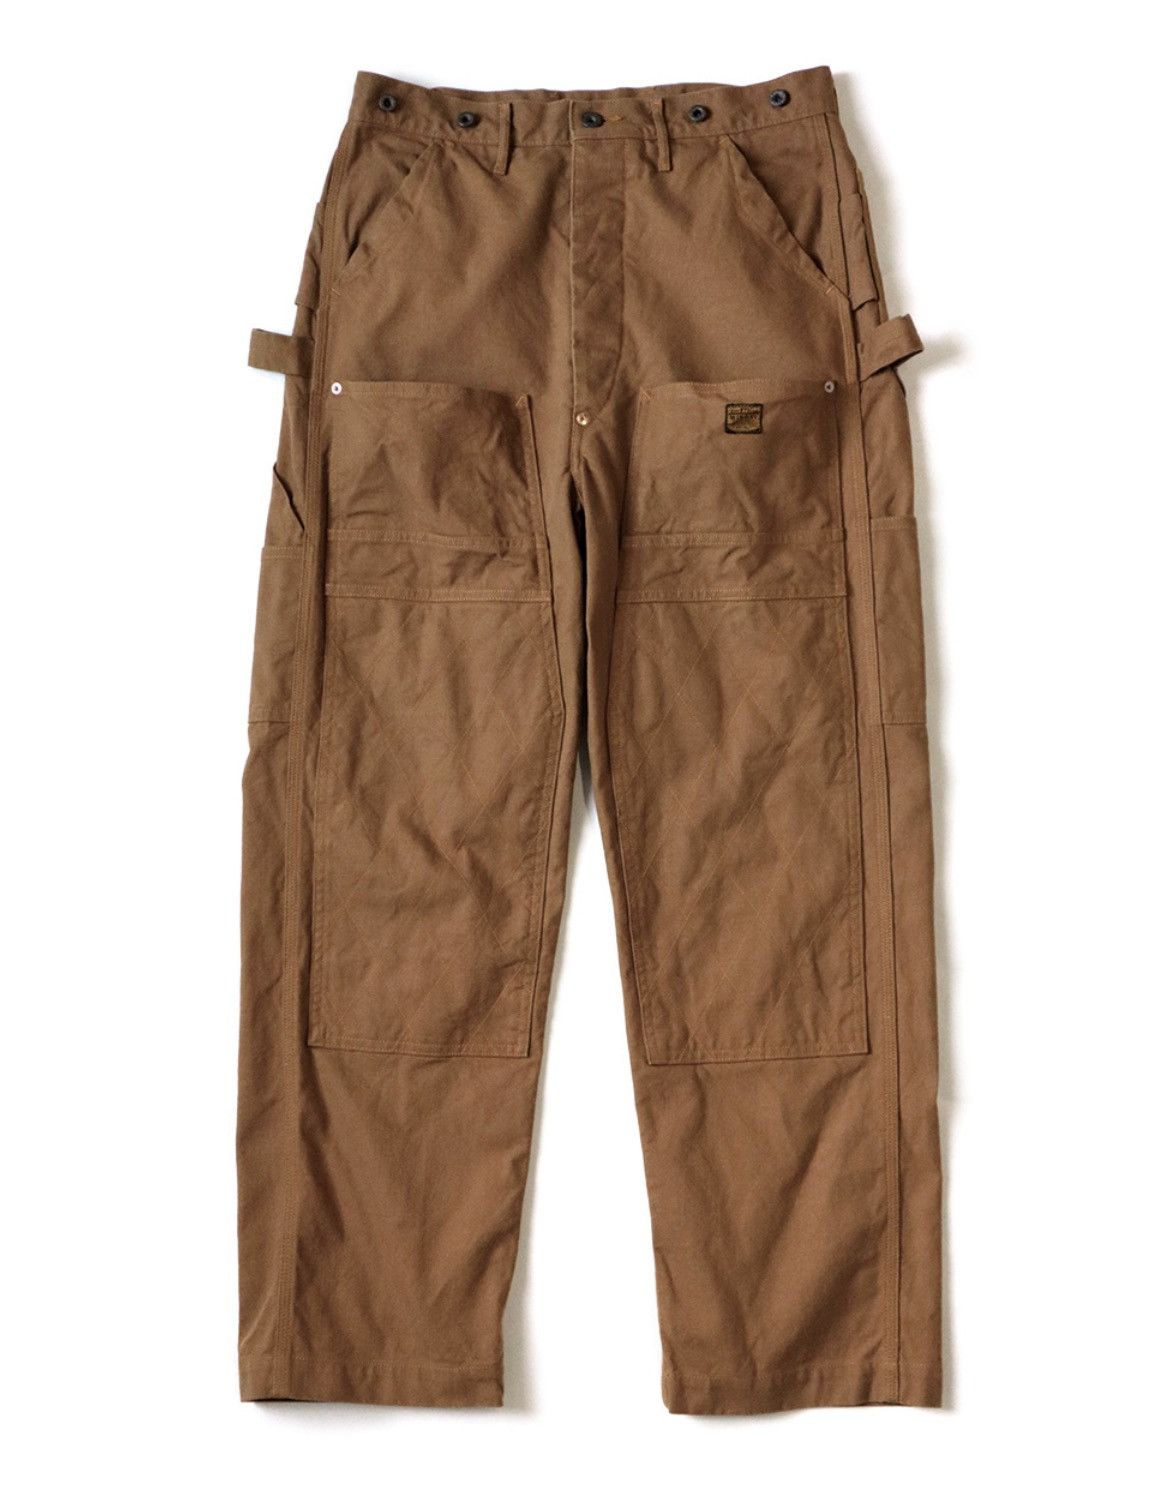 Pre-owned Kapital Canvas Lumber Pants Size 4 In Gold